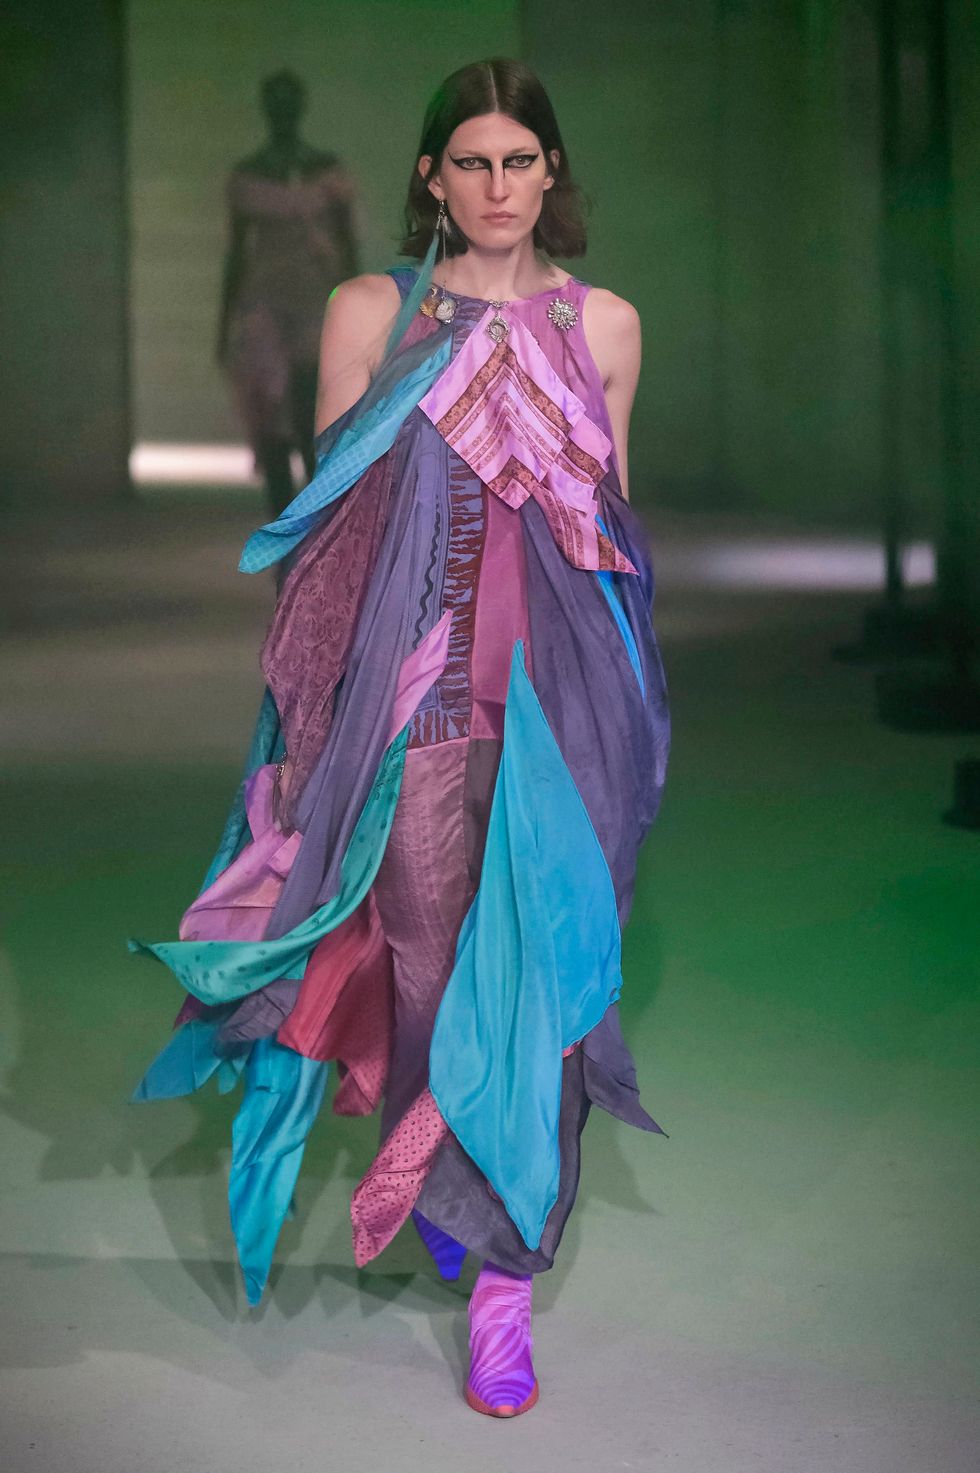 10 Fashion Trends From Fall 2019 You Need to Know - PAPER